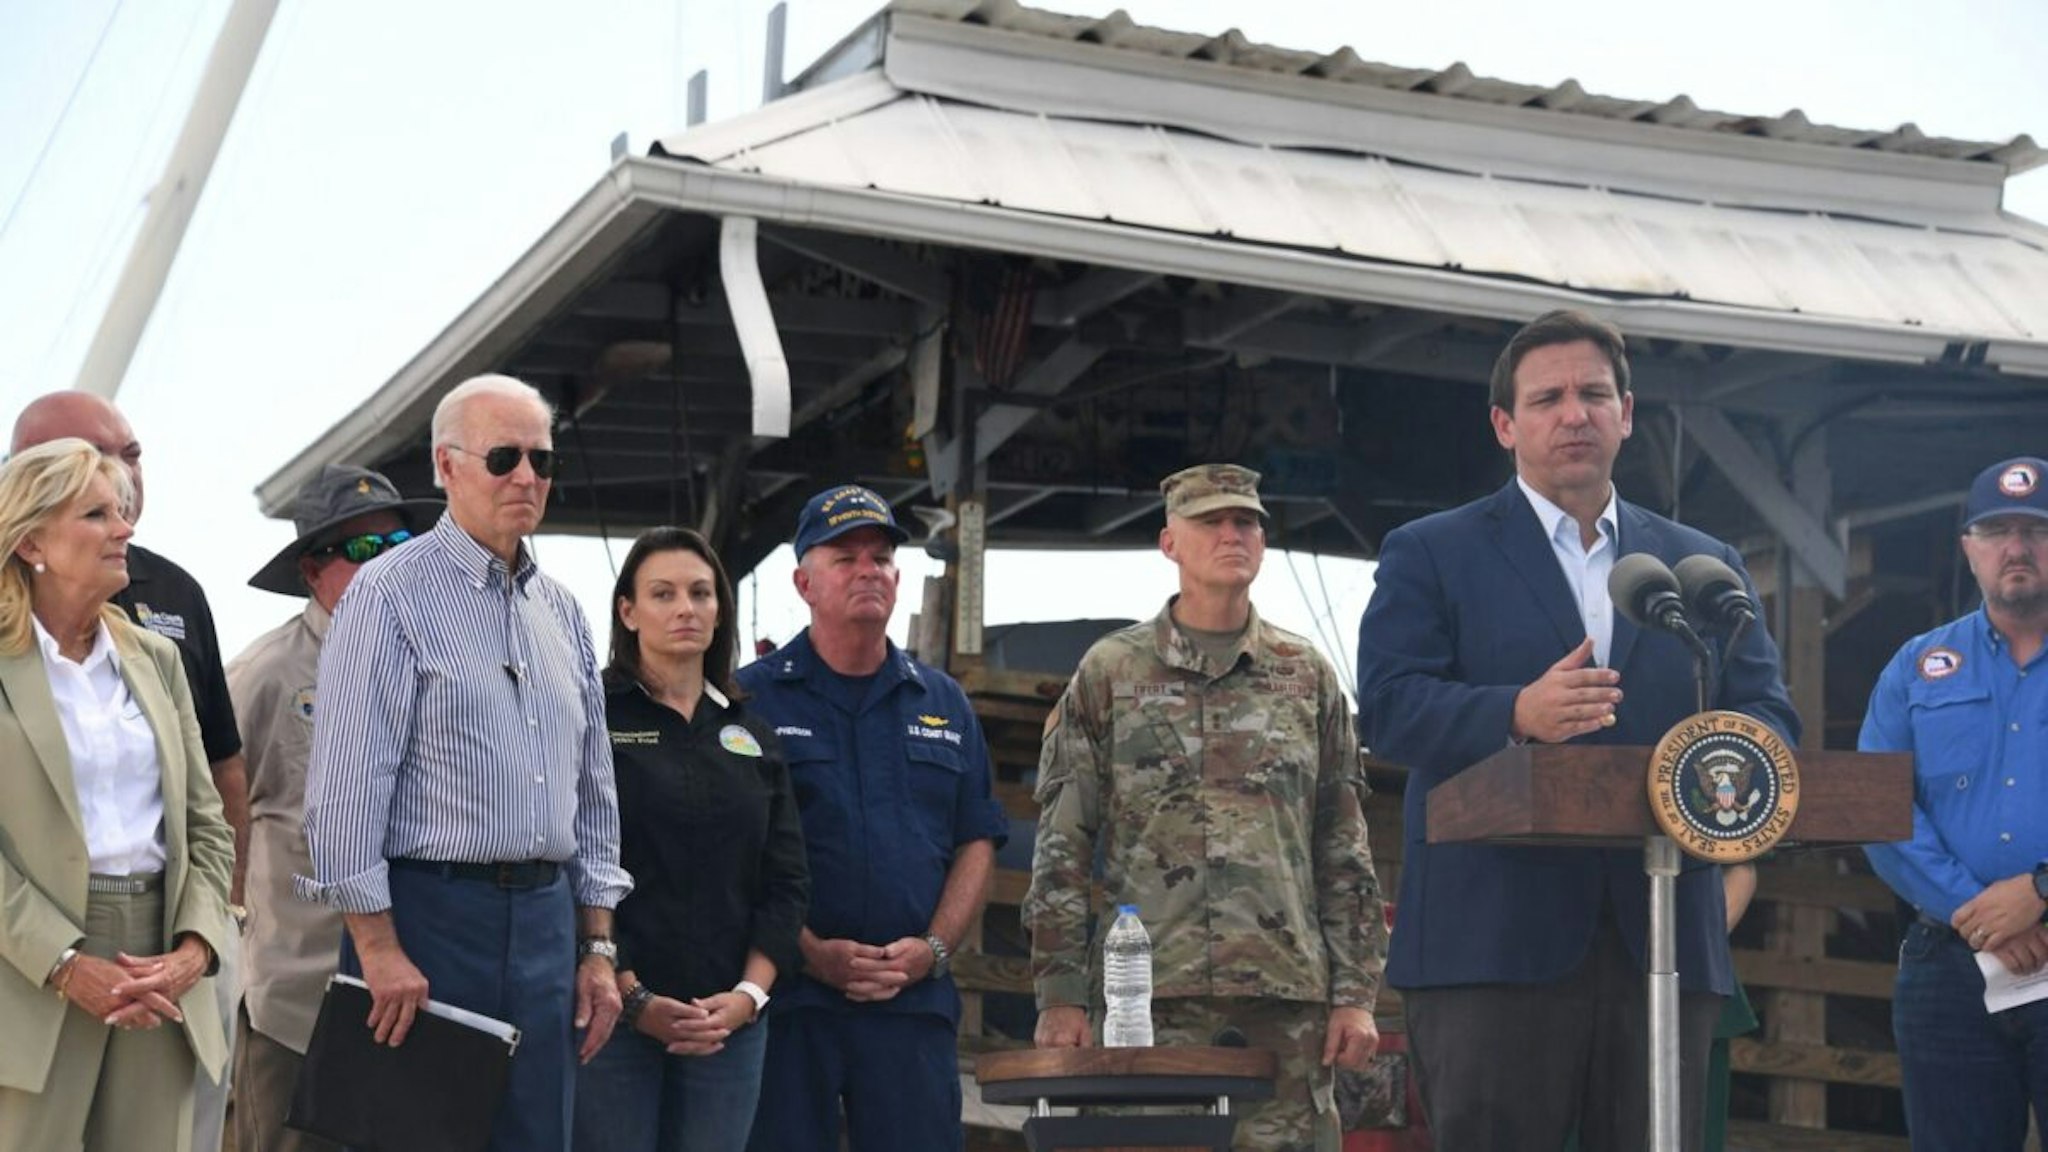 US President Joe Biden and US First Lady Jill Biden listen to Florida Governor Ron DeSantis speak in a neighborhood impacted by Hurricane Ian at Fishermans Wharf in Fort Myers, Florida, on October 5, 2022.